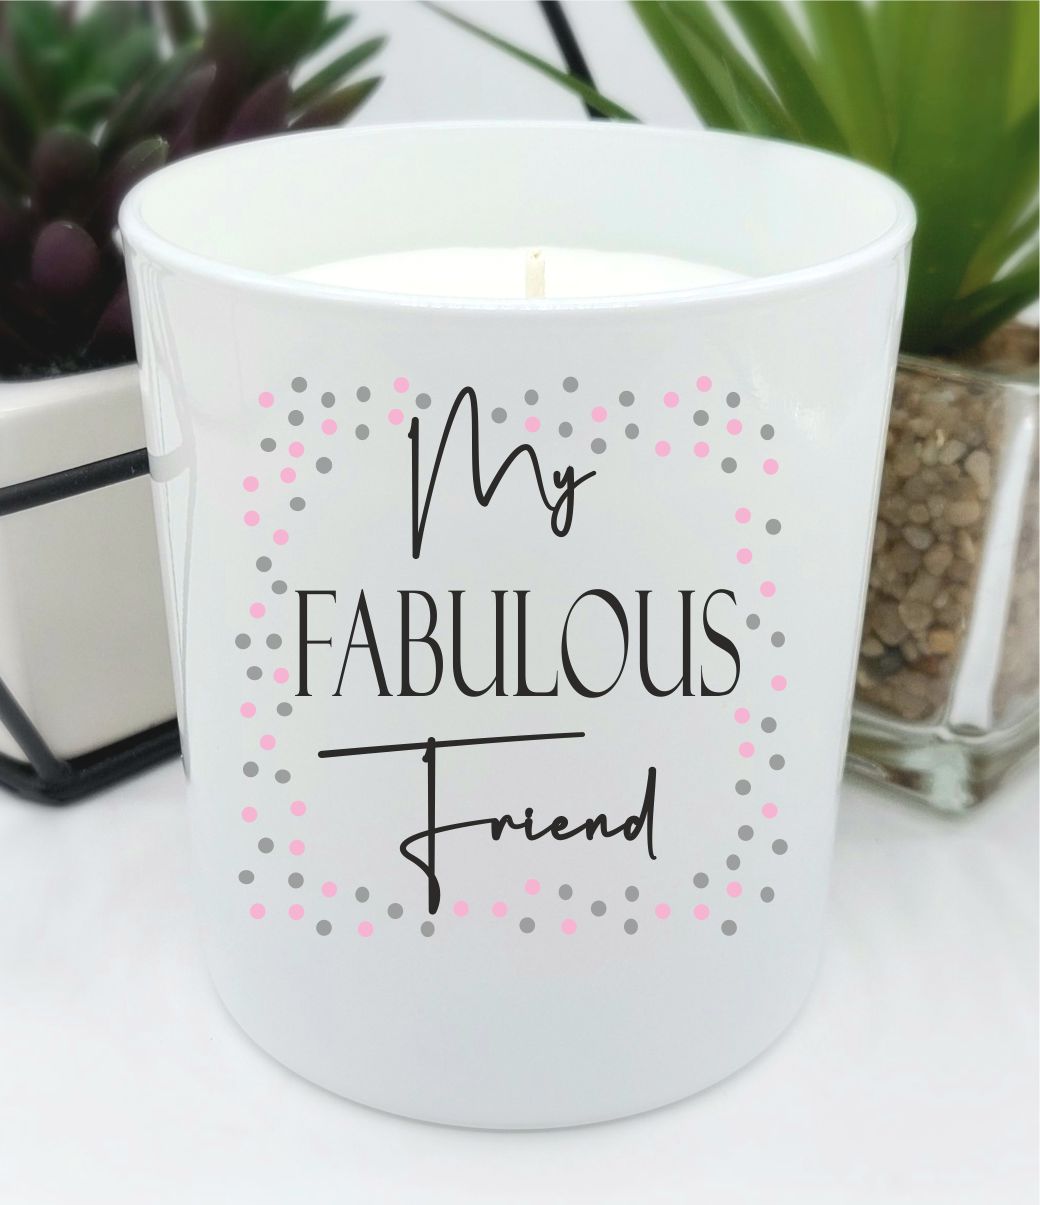 Fabulous friend scented candle gift